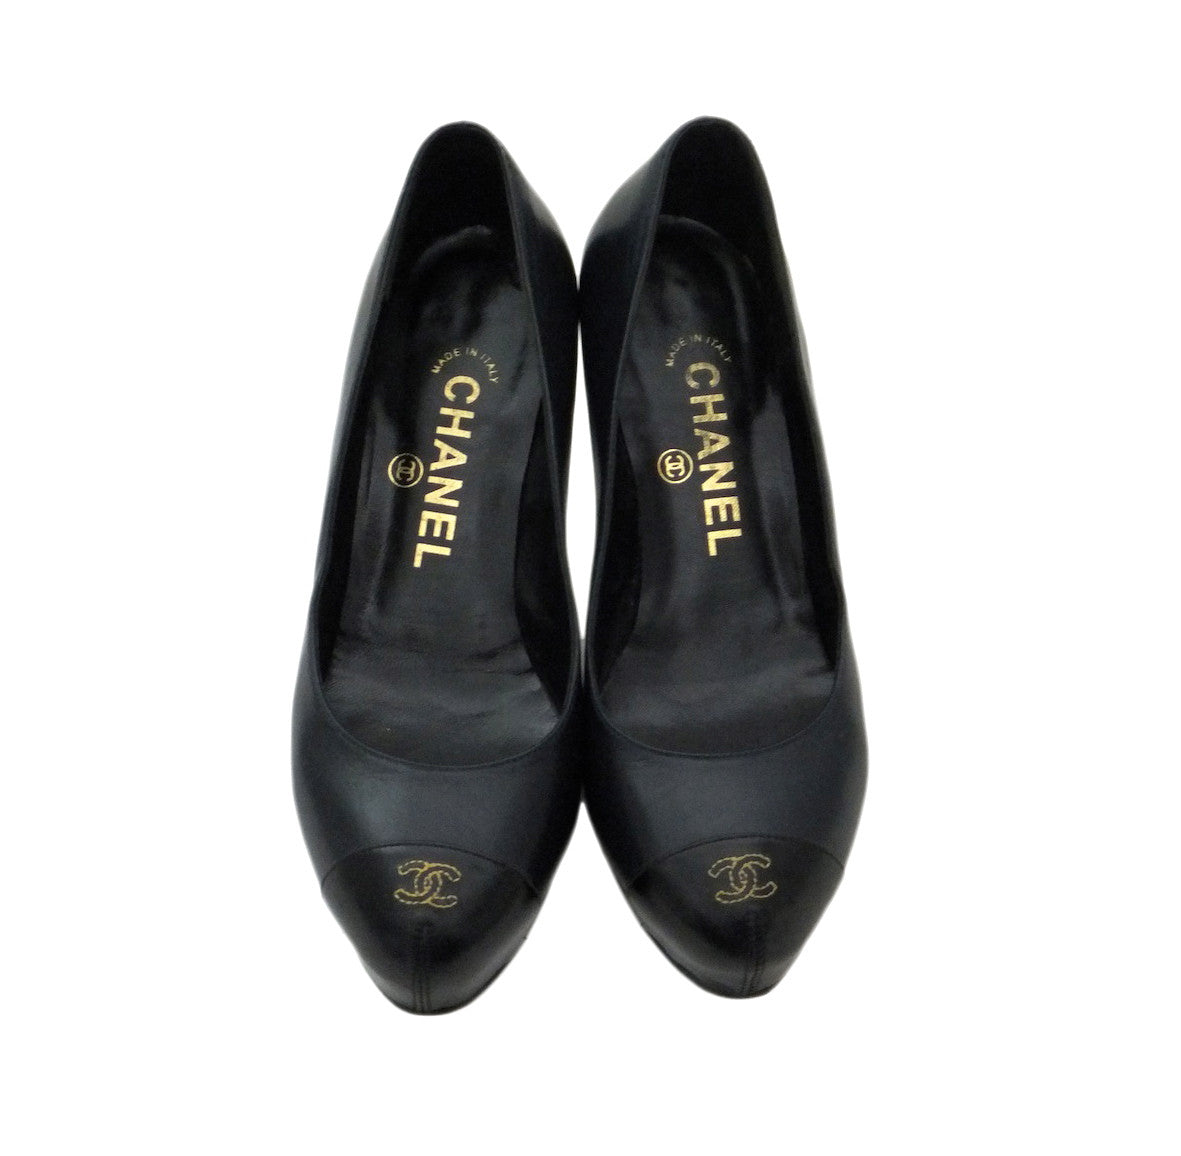 Authentic Chanel Classic Runway Pumps